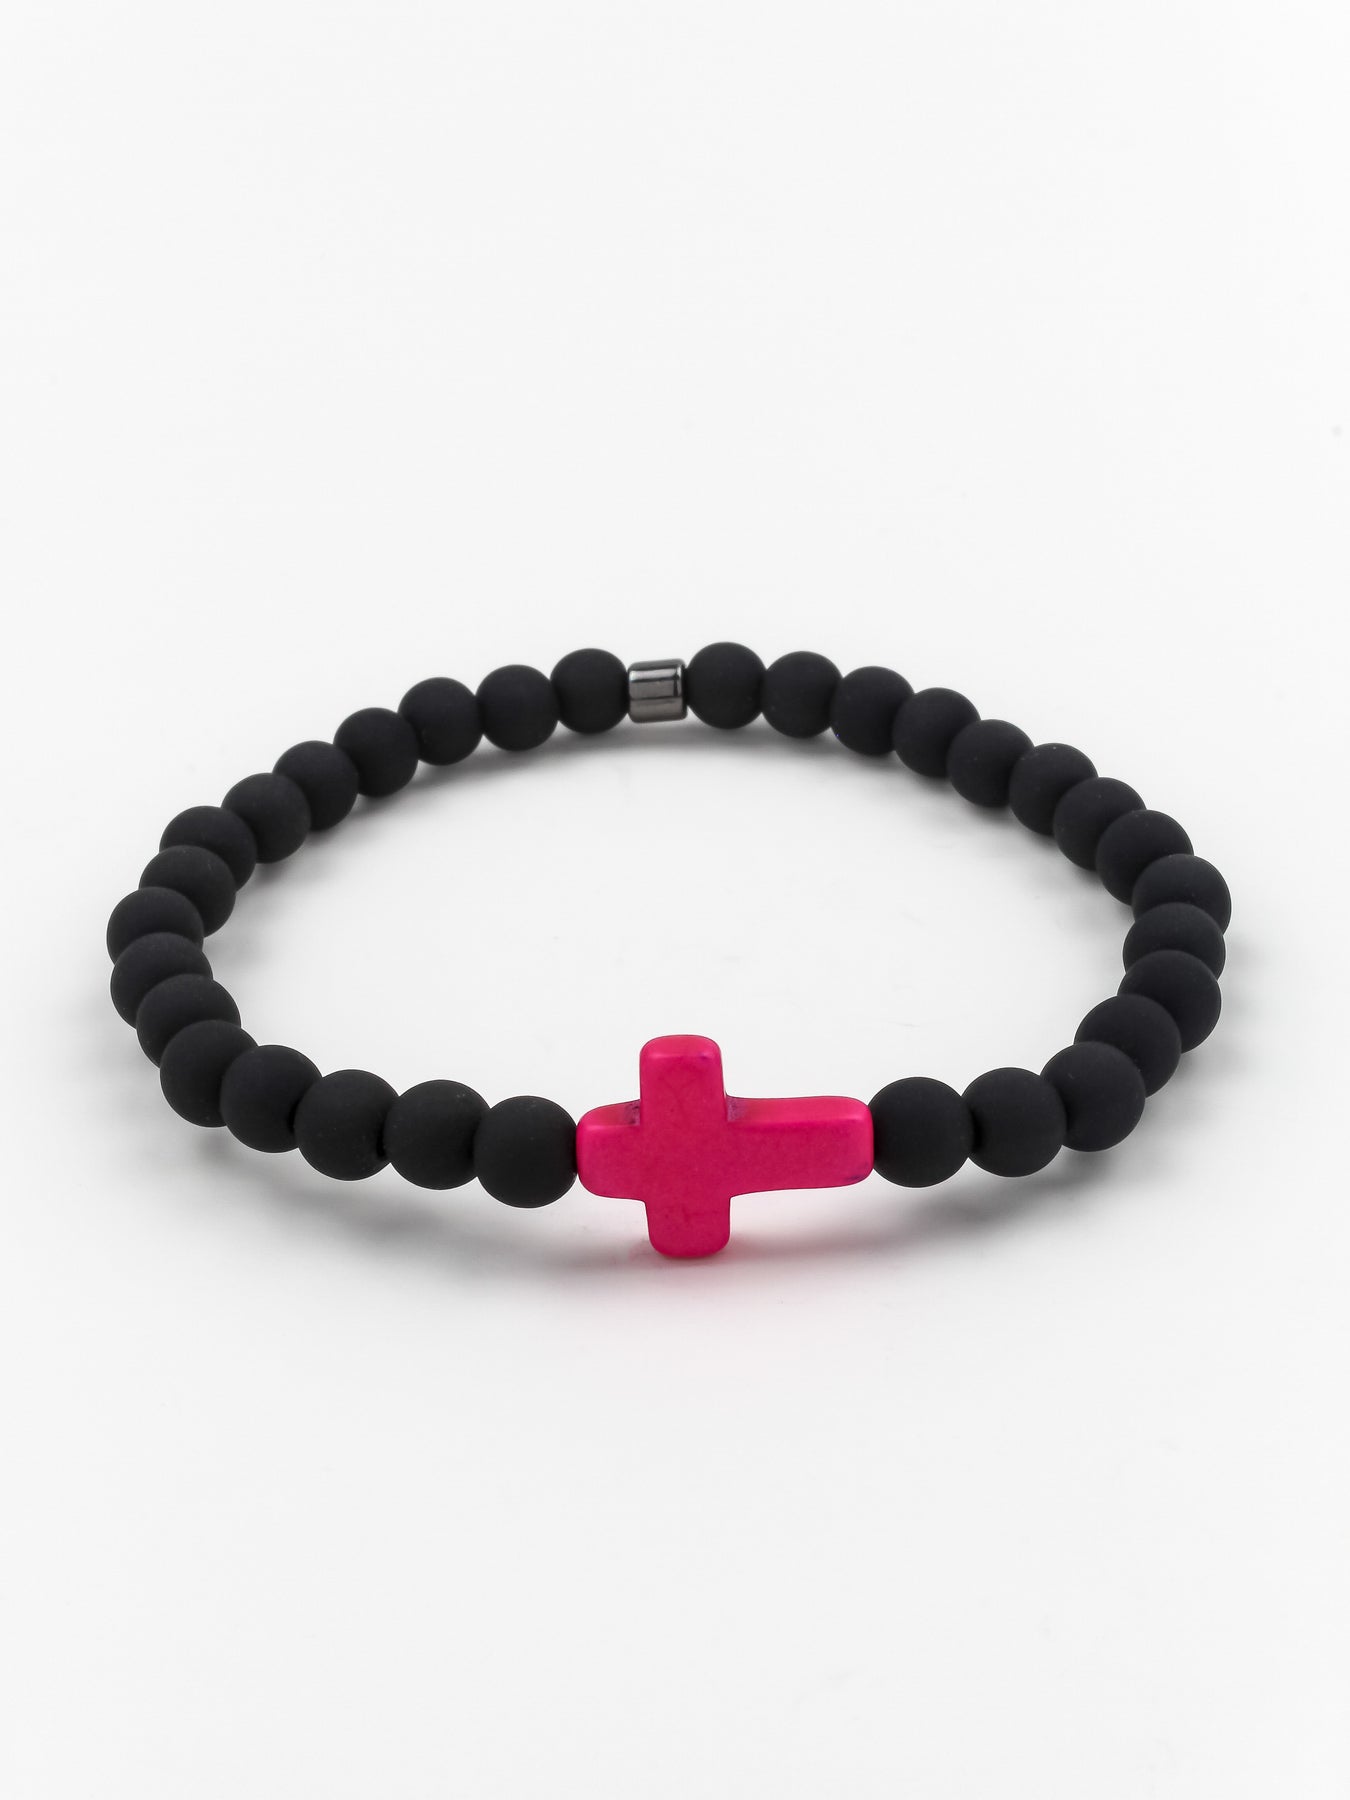 Cross Bracelet Gold/Pink Women- Designed to Fit Wrists Up to 7.5